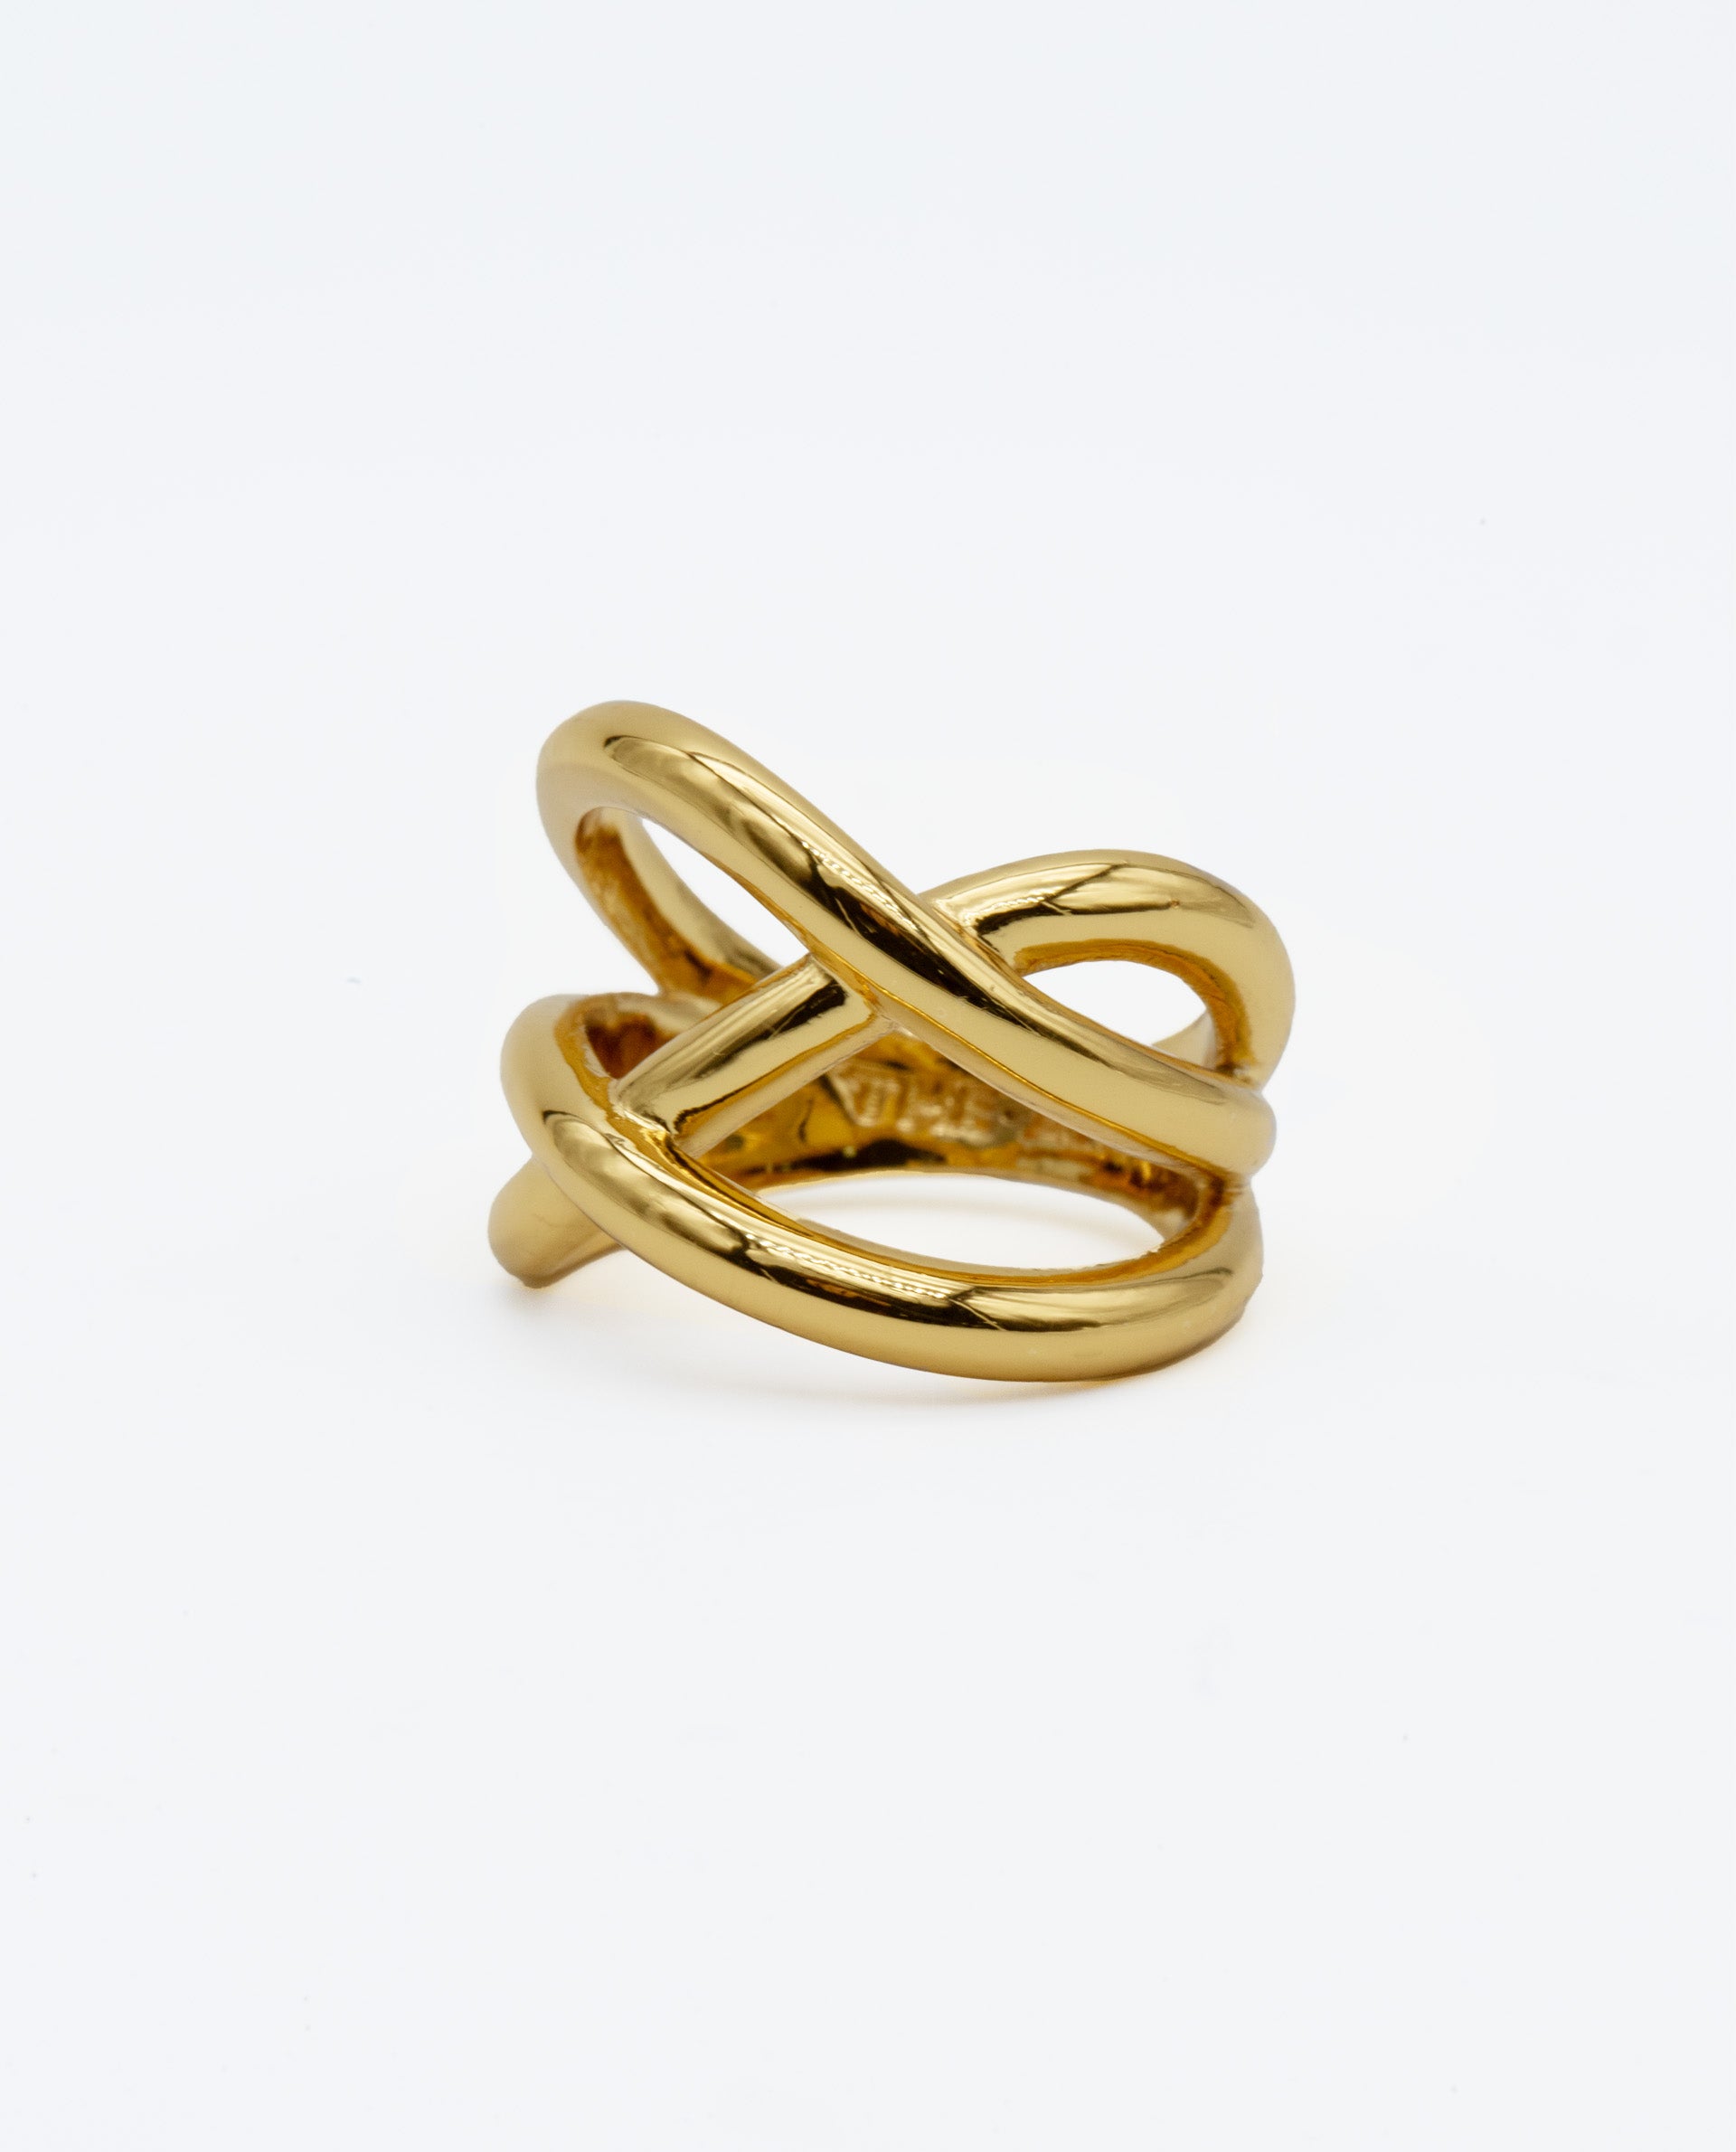 TRACES RING - GOLD PLATED